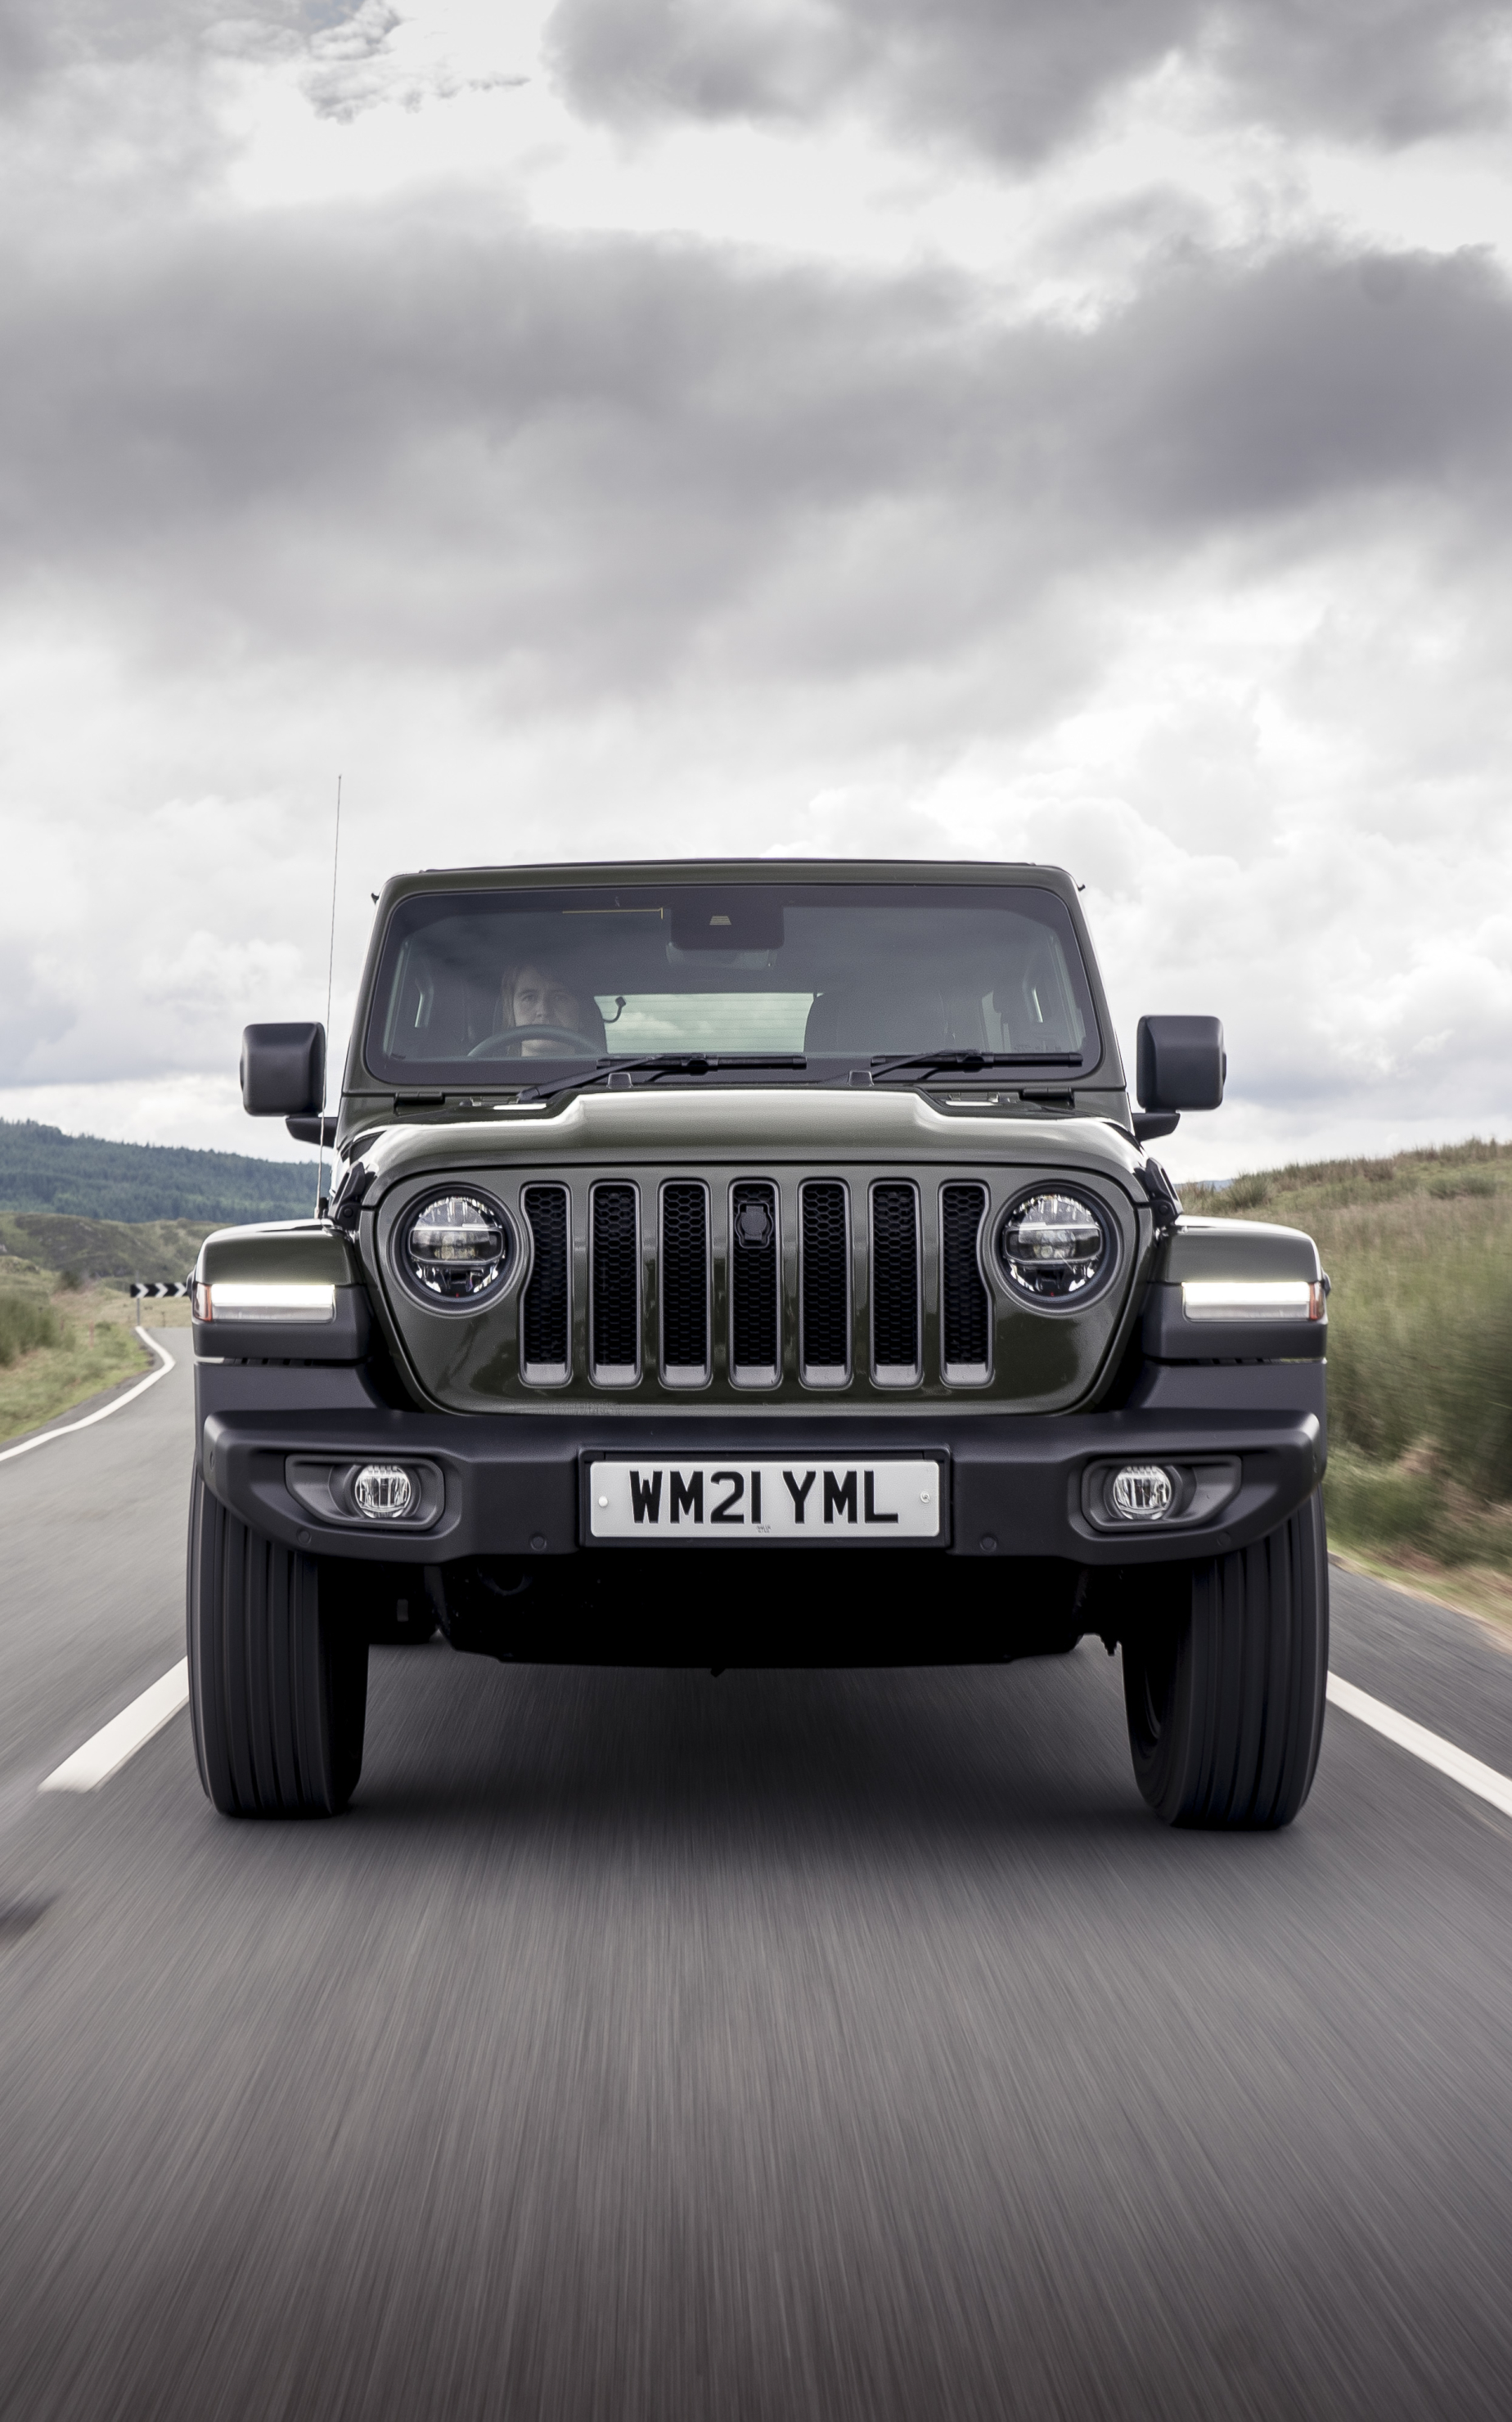 2021 Jeep Wrangler Unlimited "80th Anniversary"